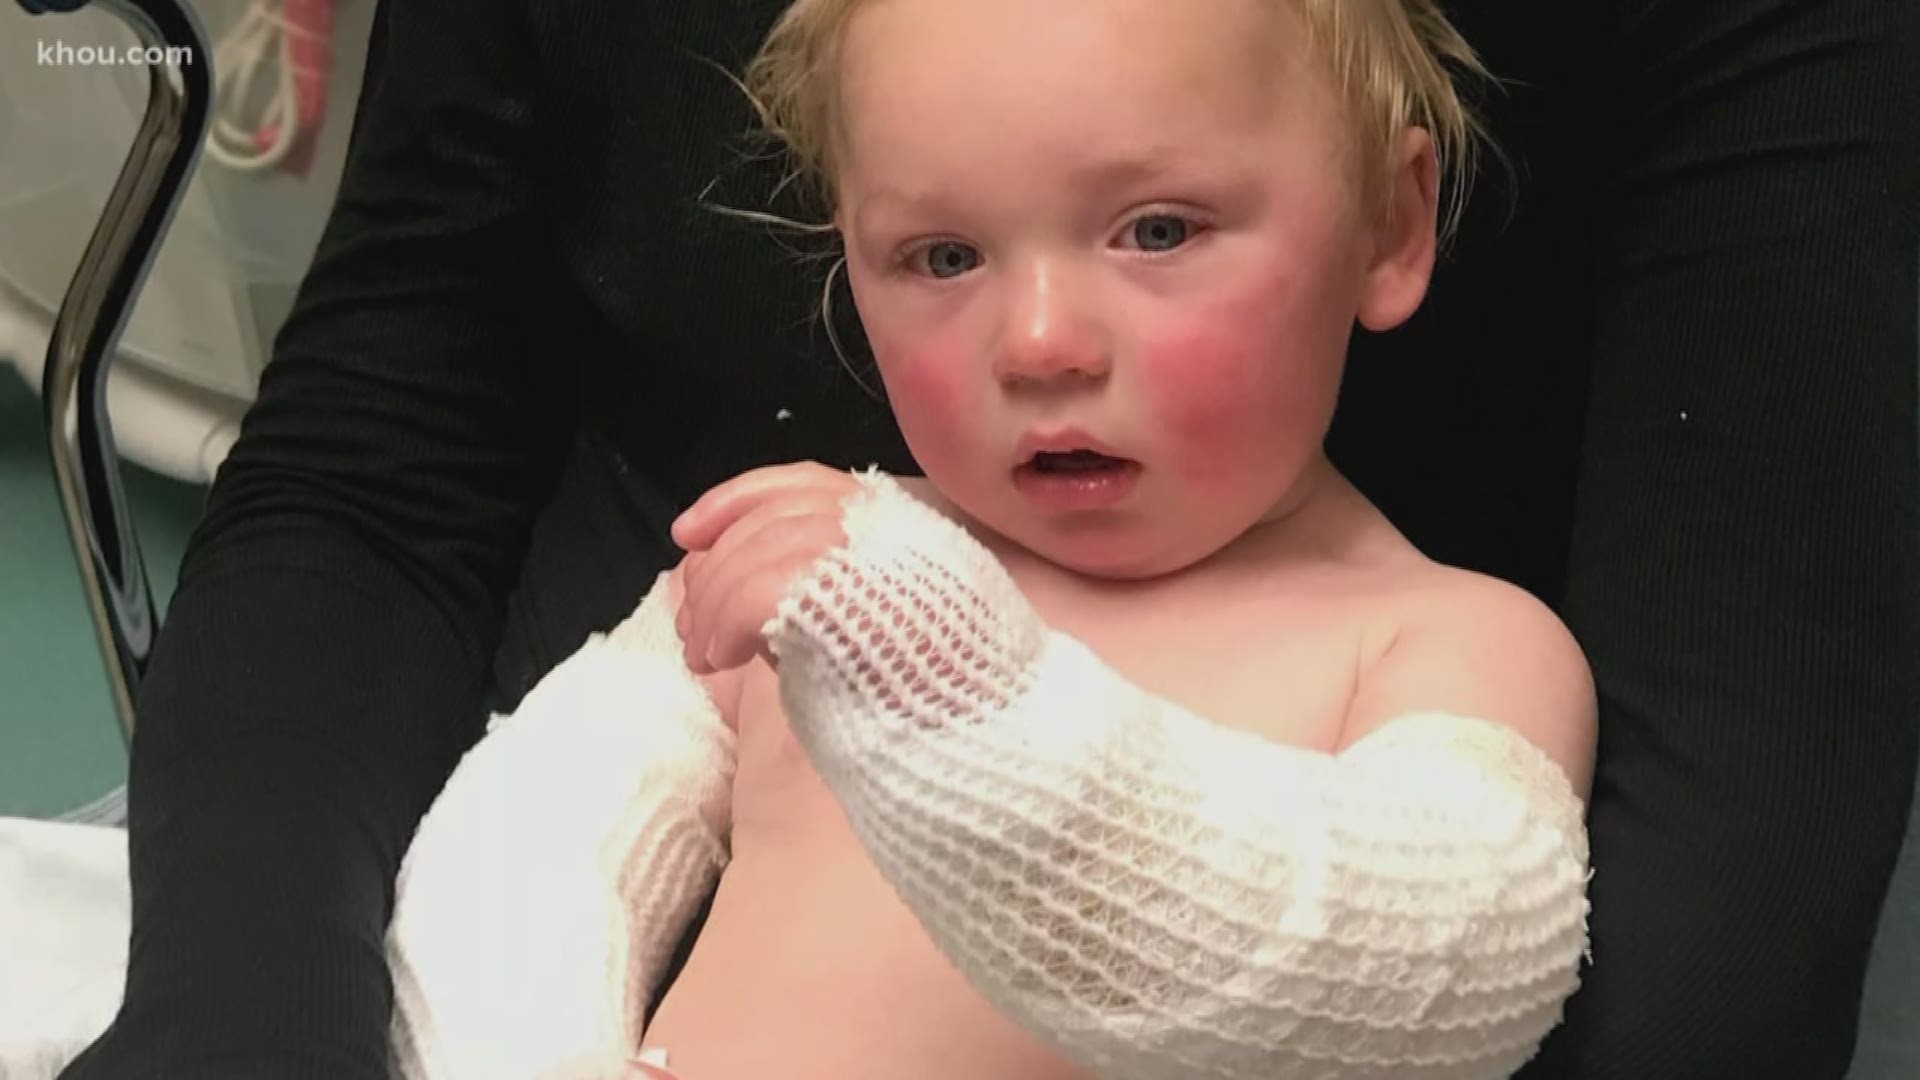 Sixteen-month-old Ayden Brown grabbed the handle of a pot of boiling water and spilled it on himself.